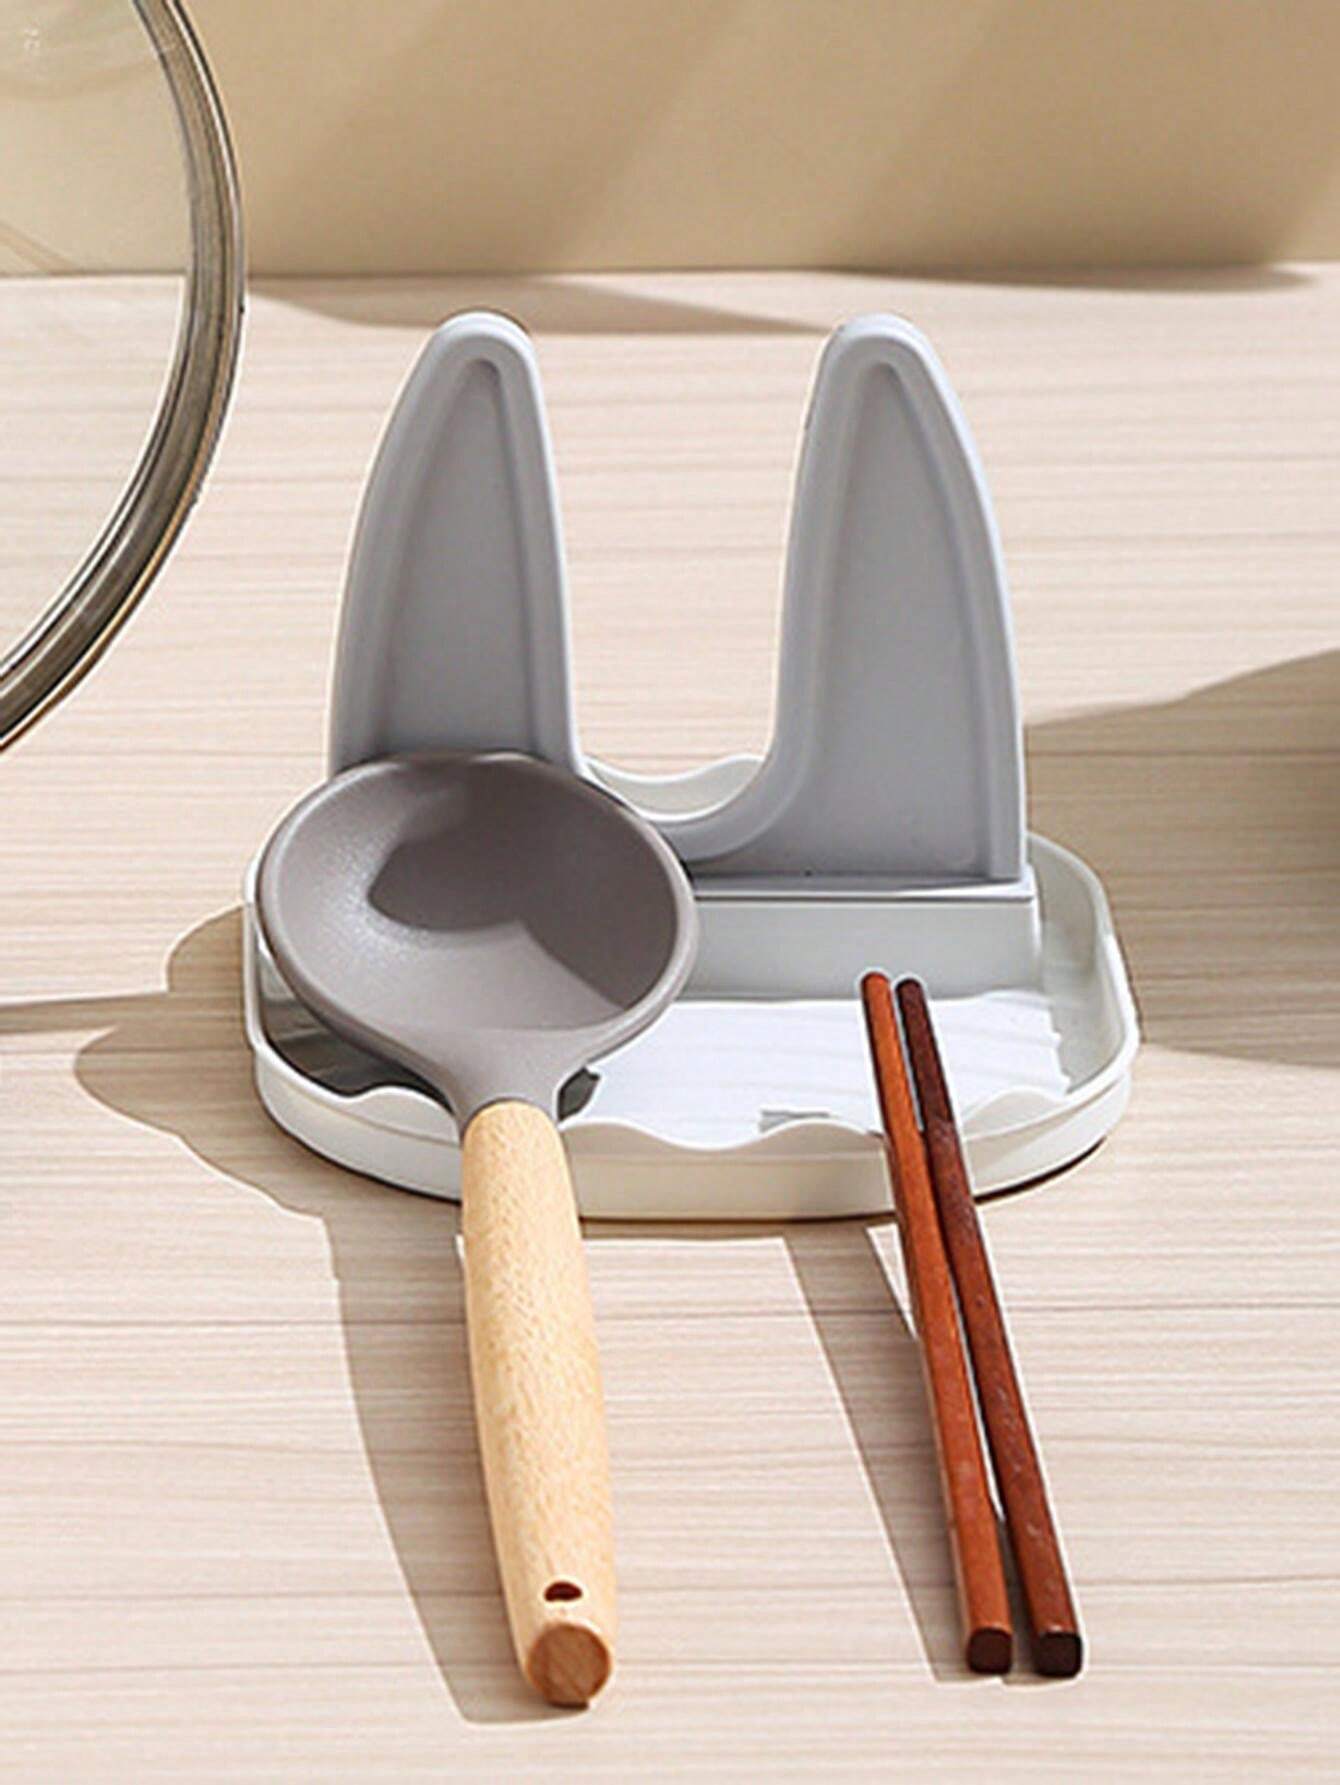 Maximize Your Kitchen Space With This 1pc Pot Lid Rack &Amp; Spatula Rack!